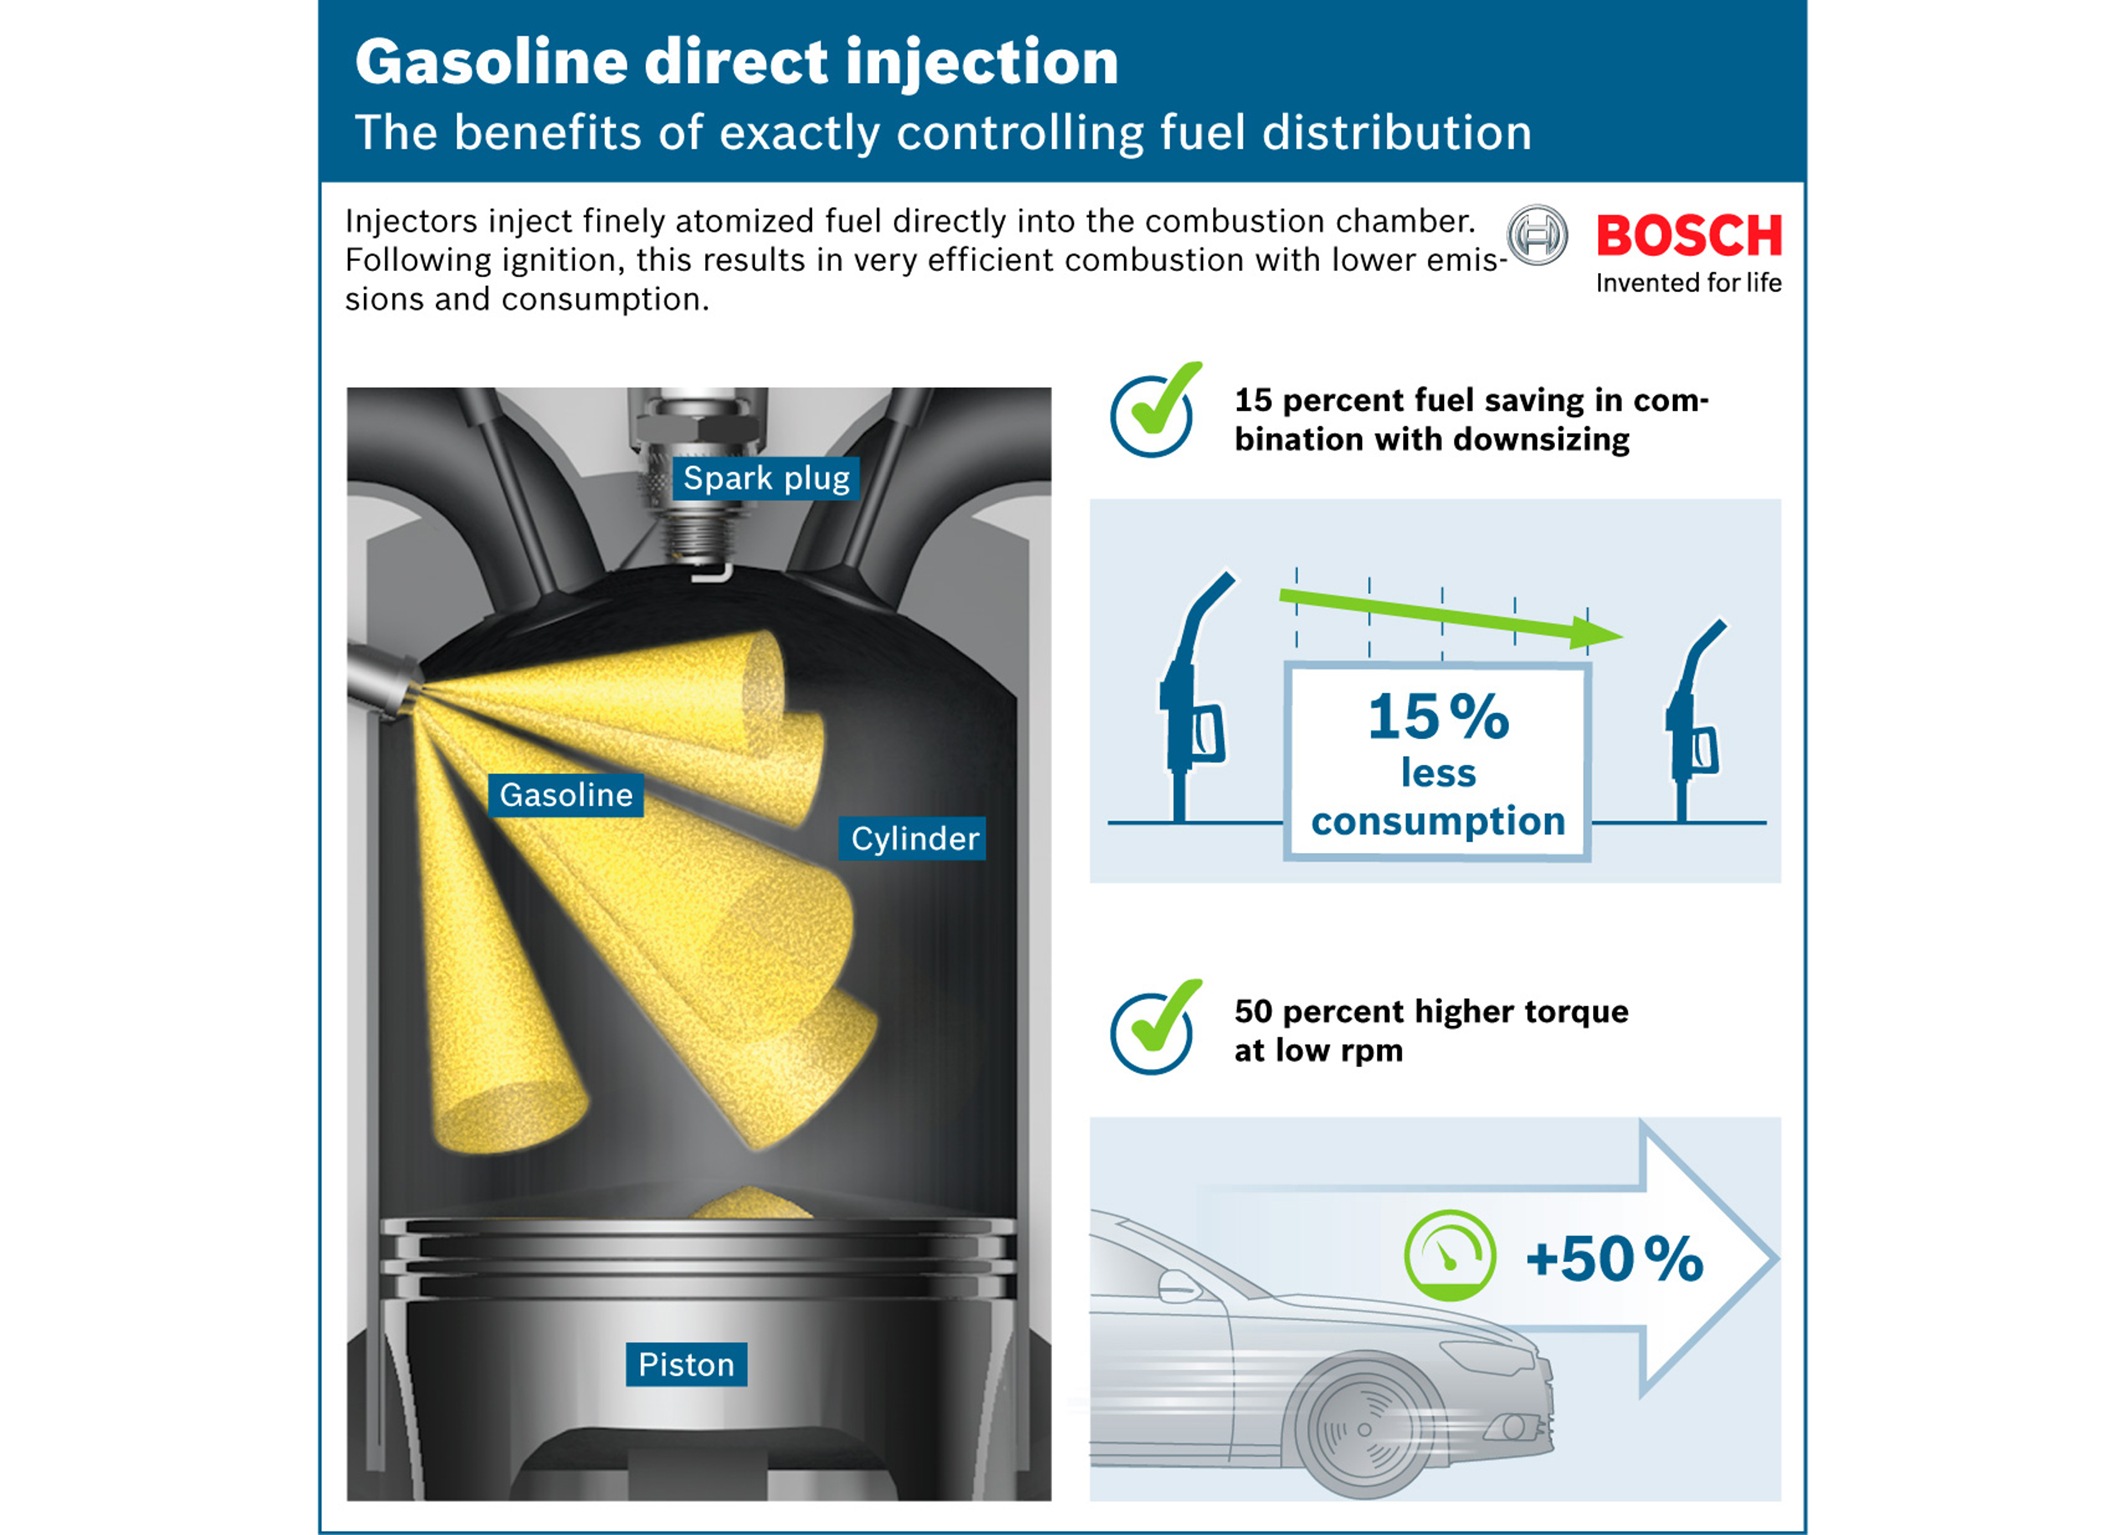 Bosch injection system